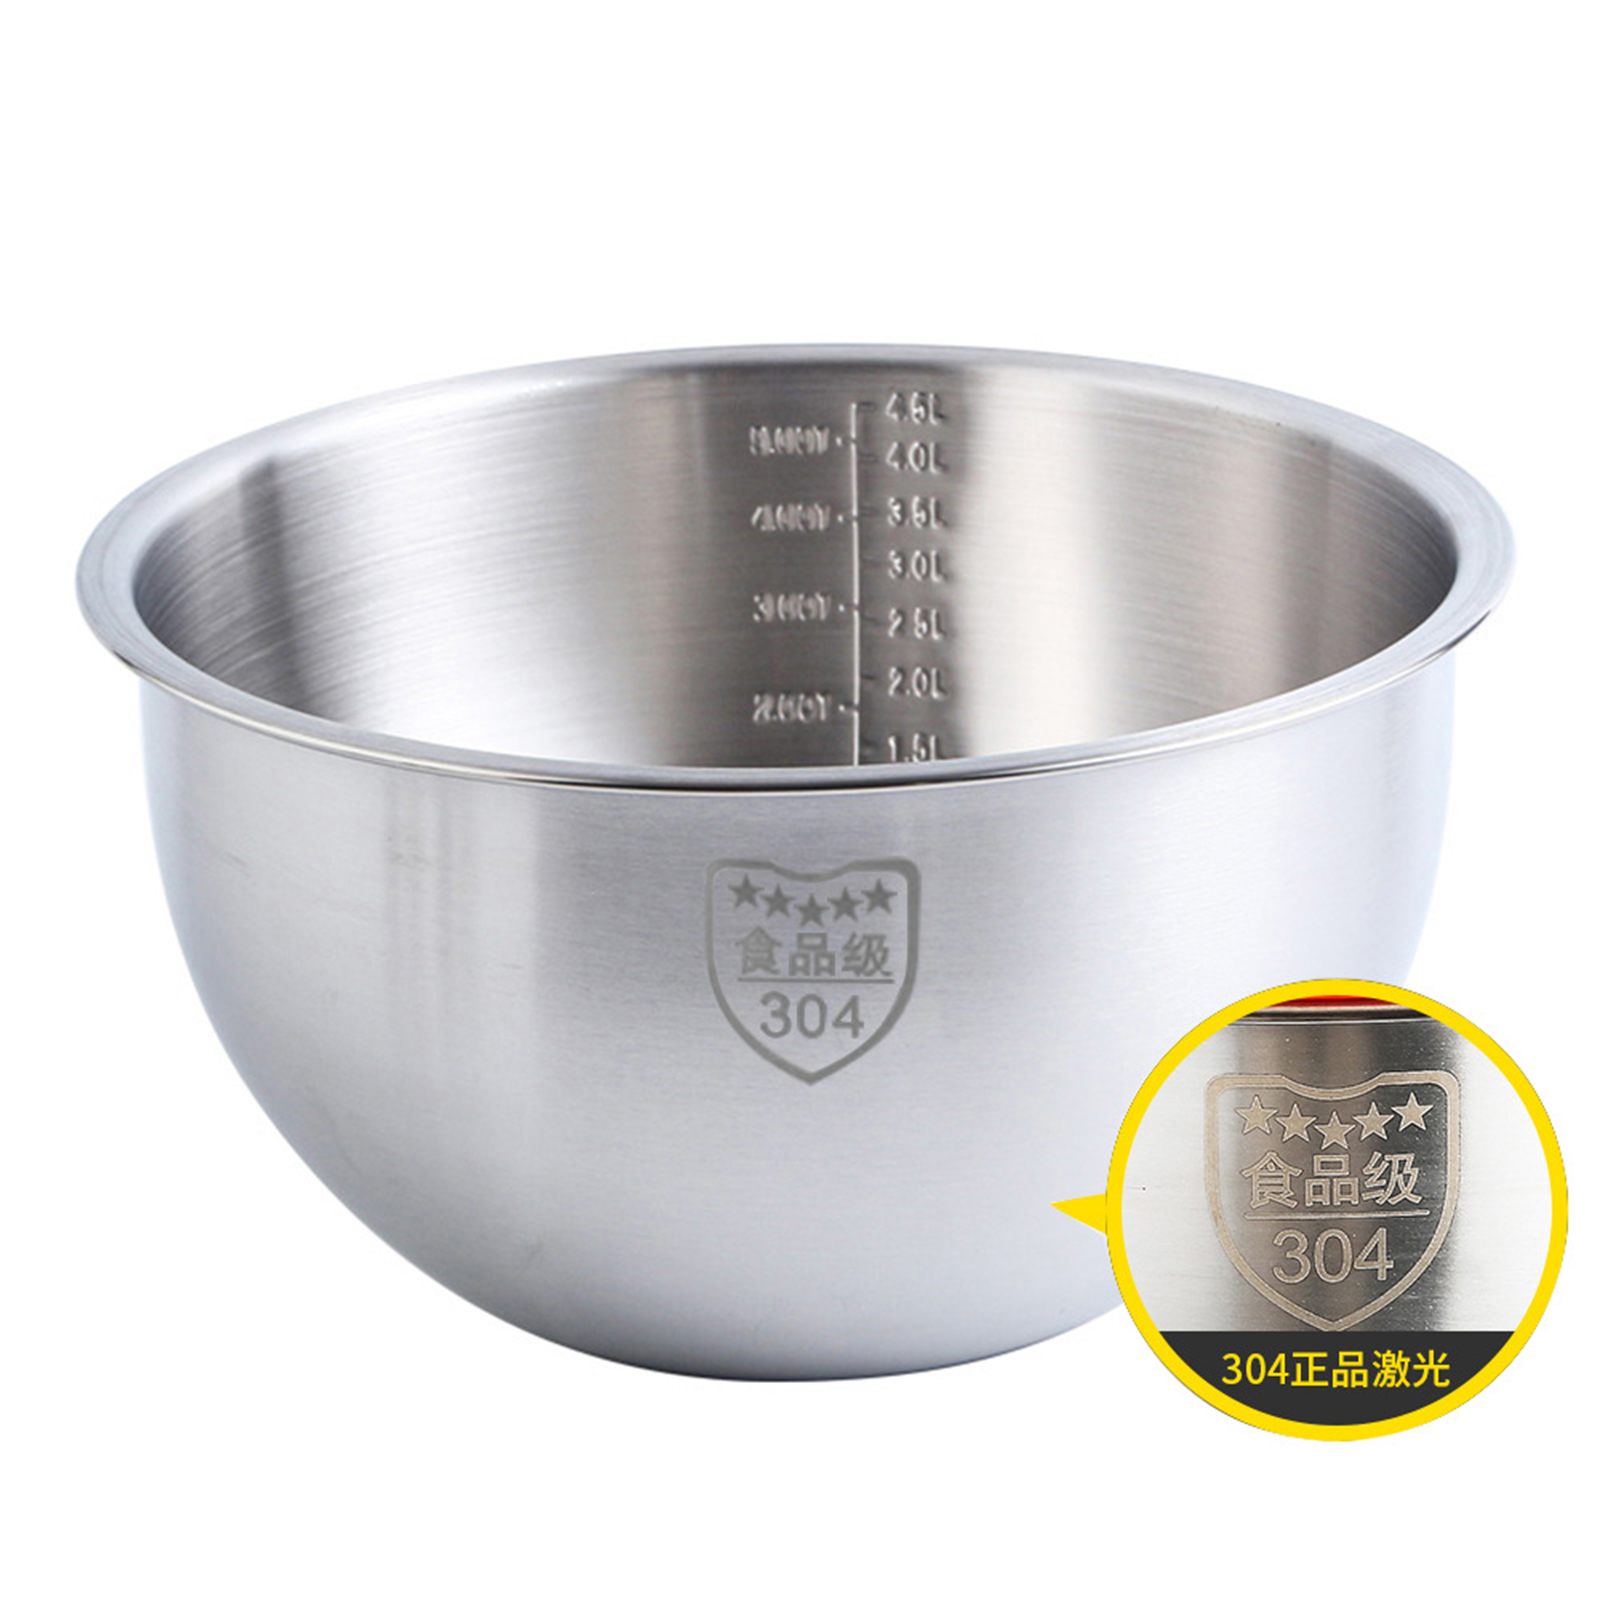 2.5l/4.5l Household Mixing Bowls 304 Stainless Steel Salad Bowl For Cooking Baking Prepping Food Storage